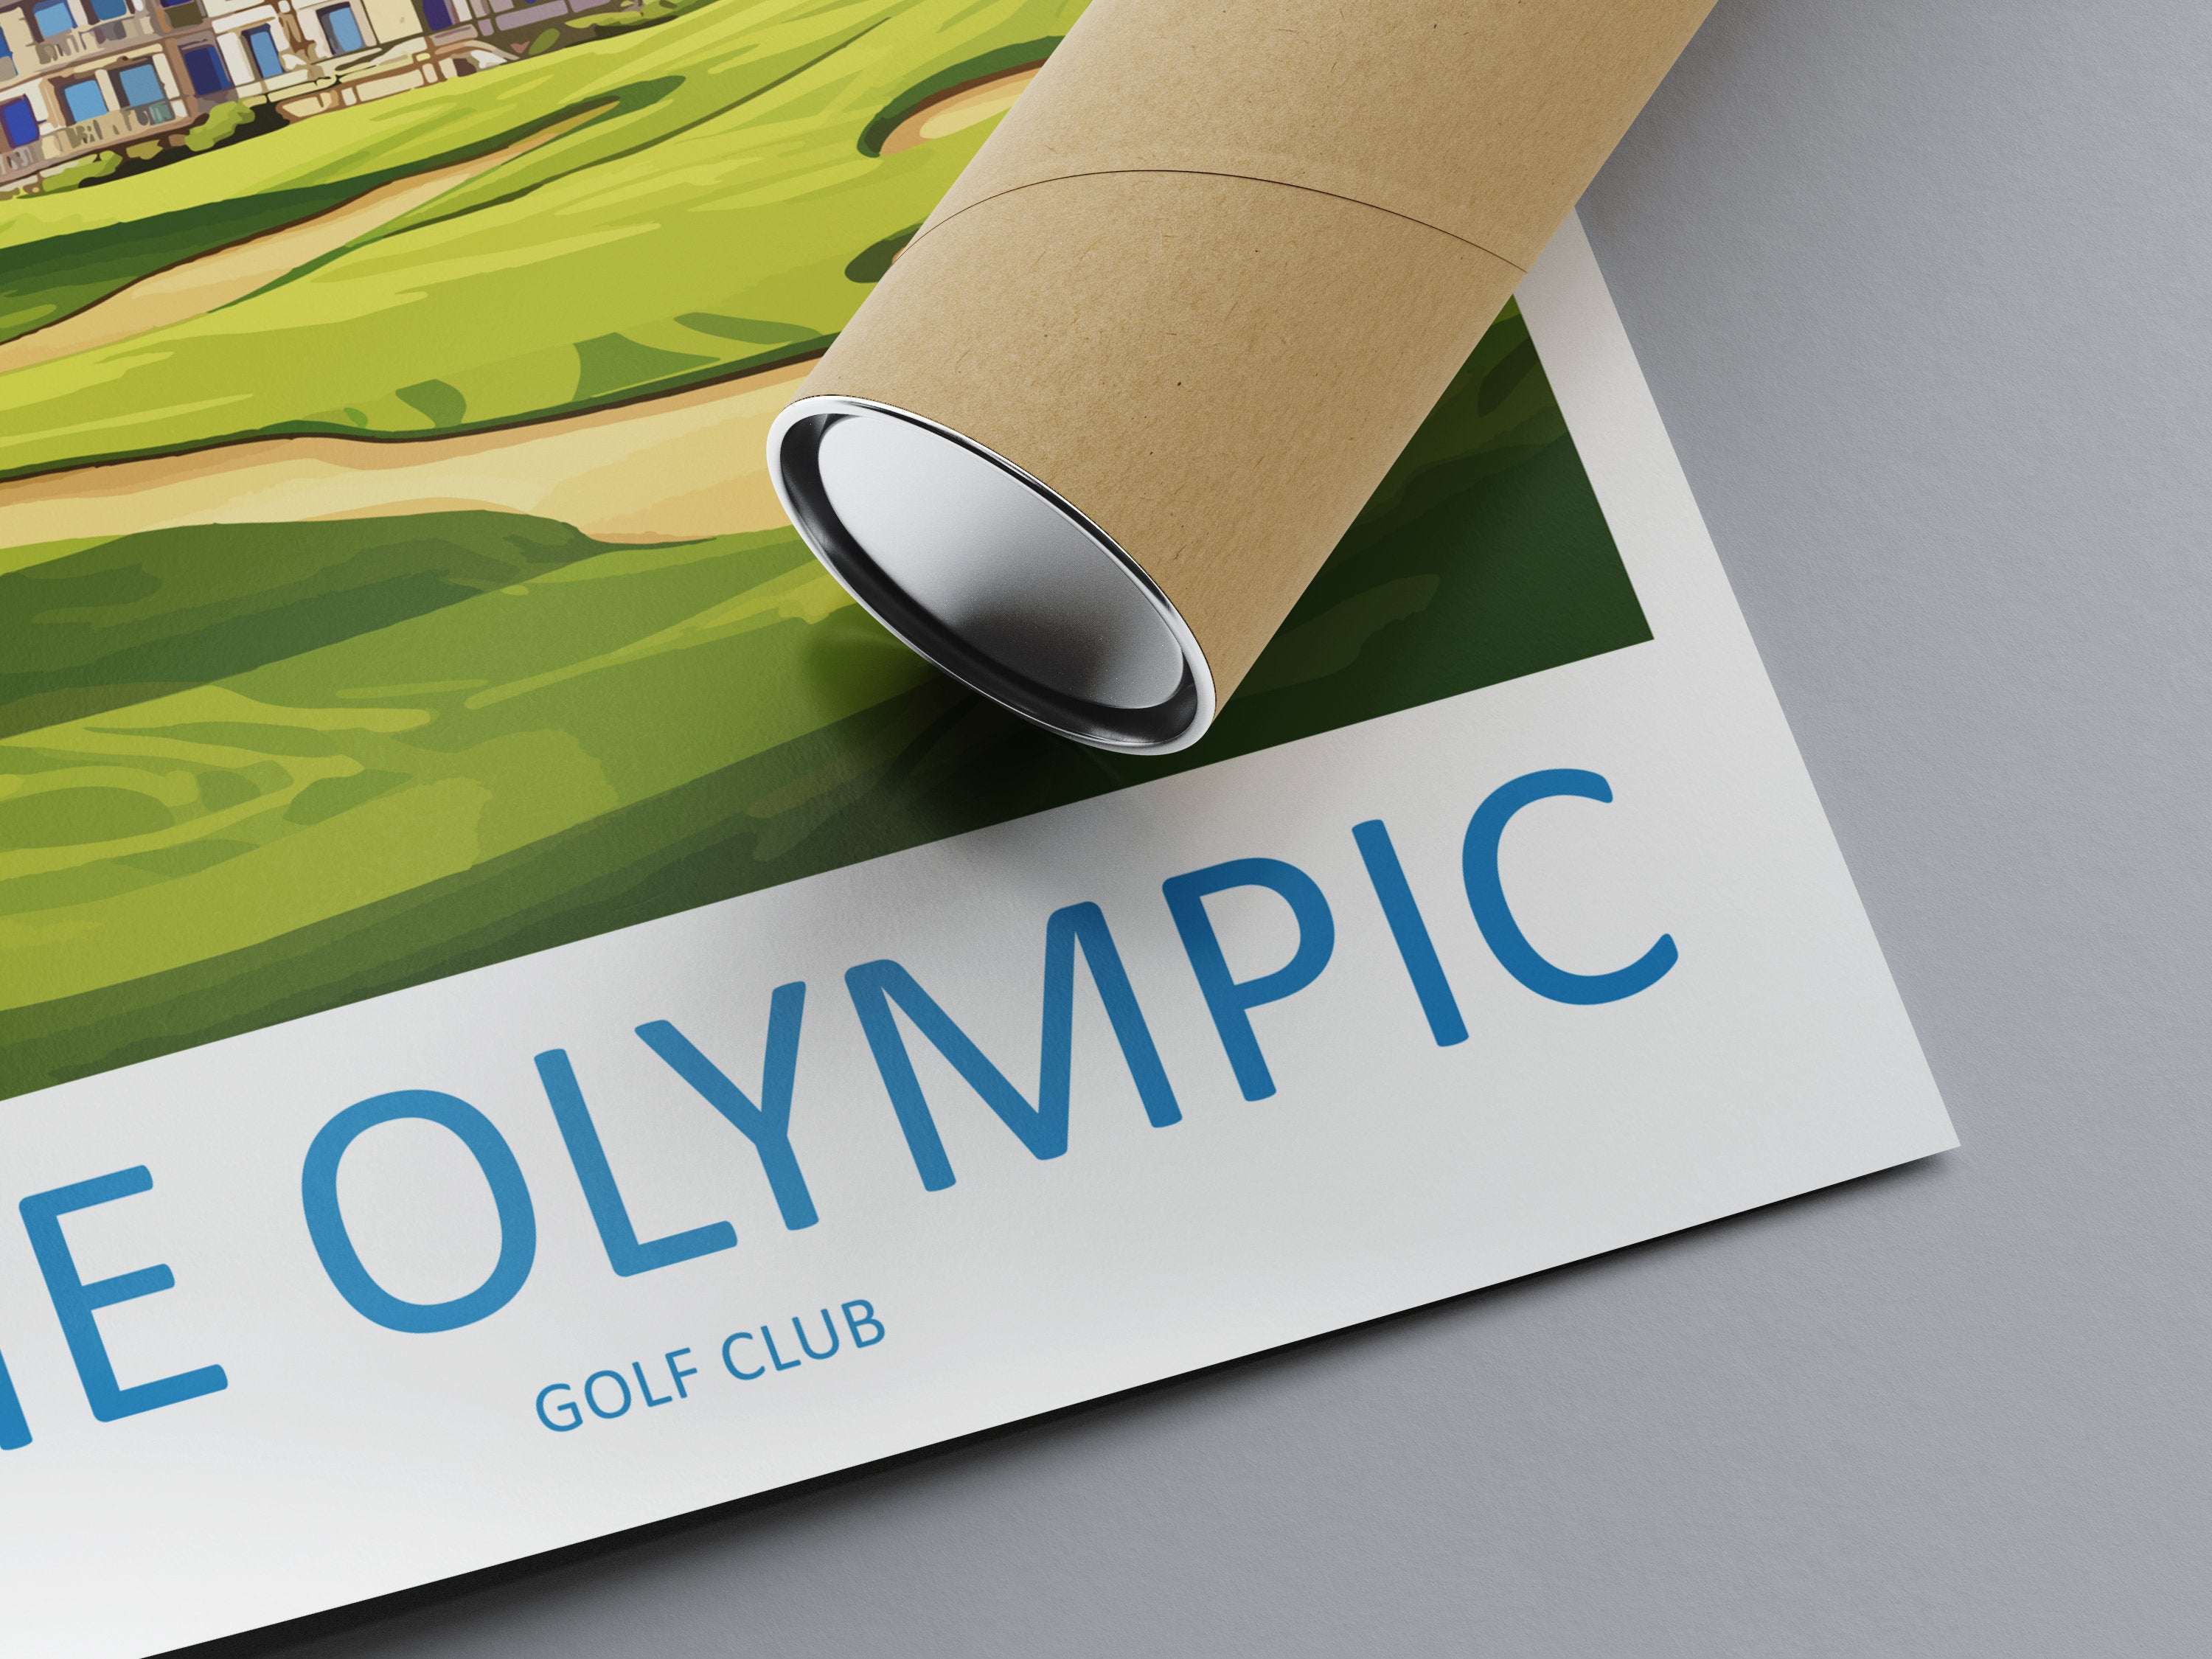 The Olympic Golf Club Travel Print Wall Art The Olympic Golf Course Wall Hanging Home Décor The Olympic Golf Course Gift Art Lovers